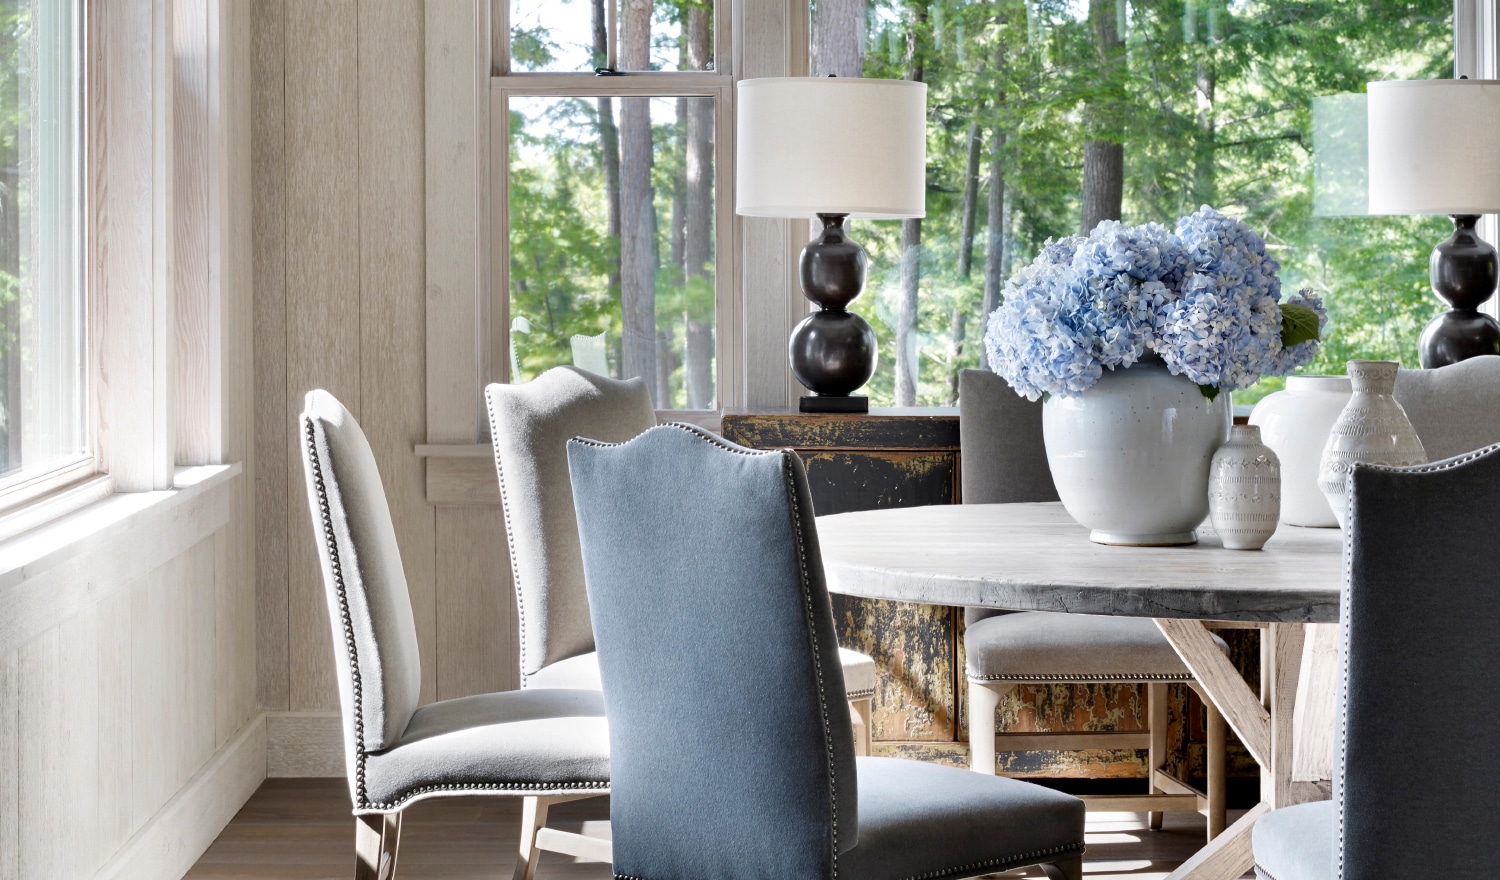 Tranquil Walloon Lake | Exterior Architect: Greg Pressley | Interior Architect: Peter Block | Interior Design: Beth Webb | Photography Emily Followill dining room with round table. | dining room ideas | dining room design | dining room decor 